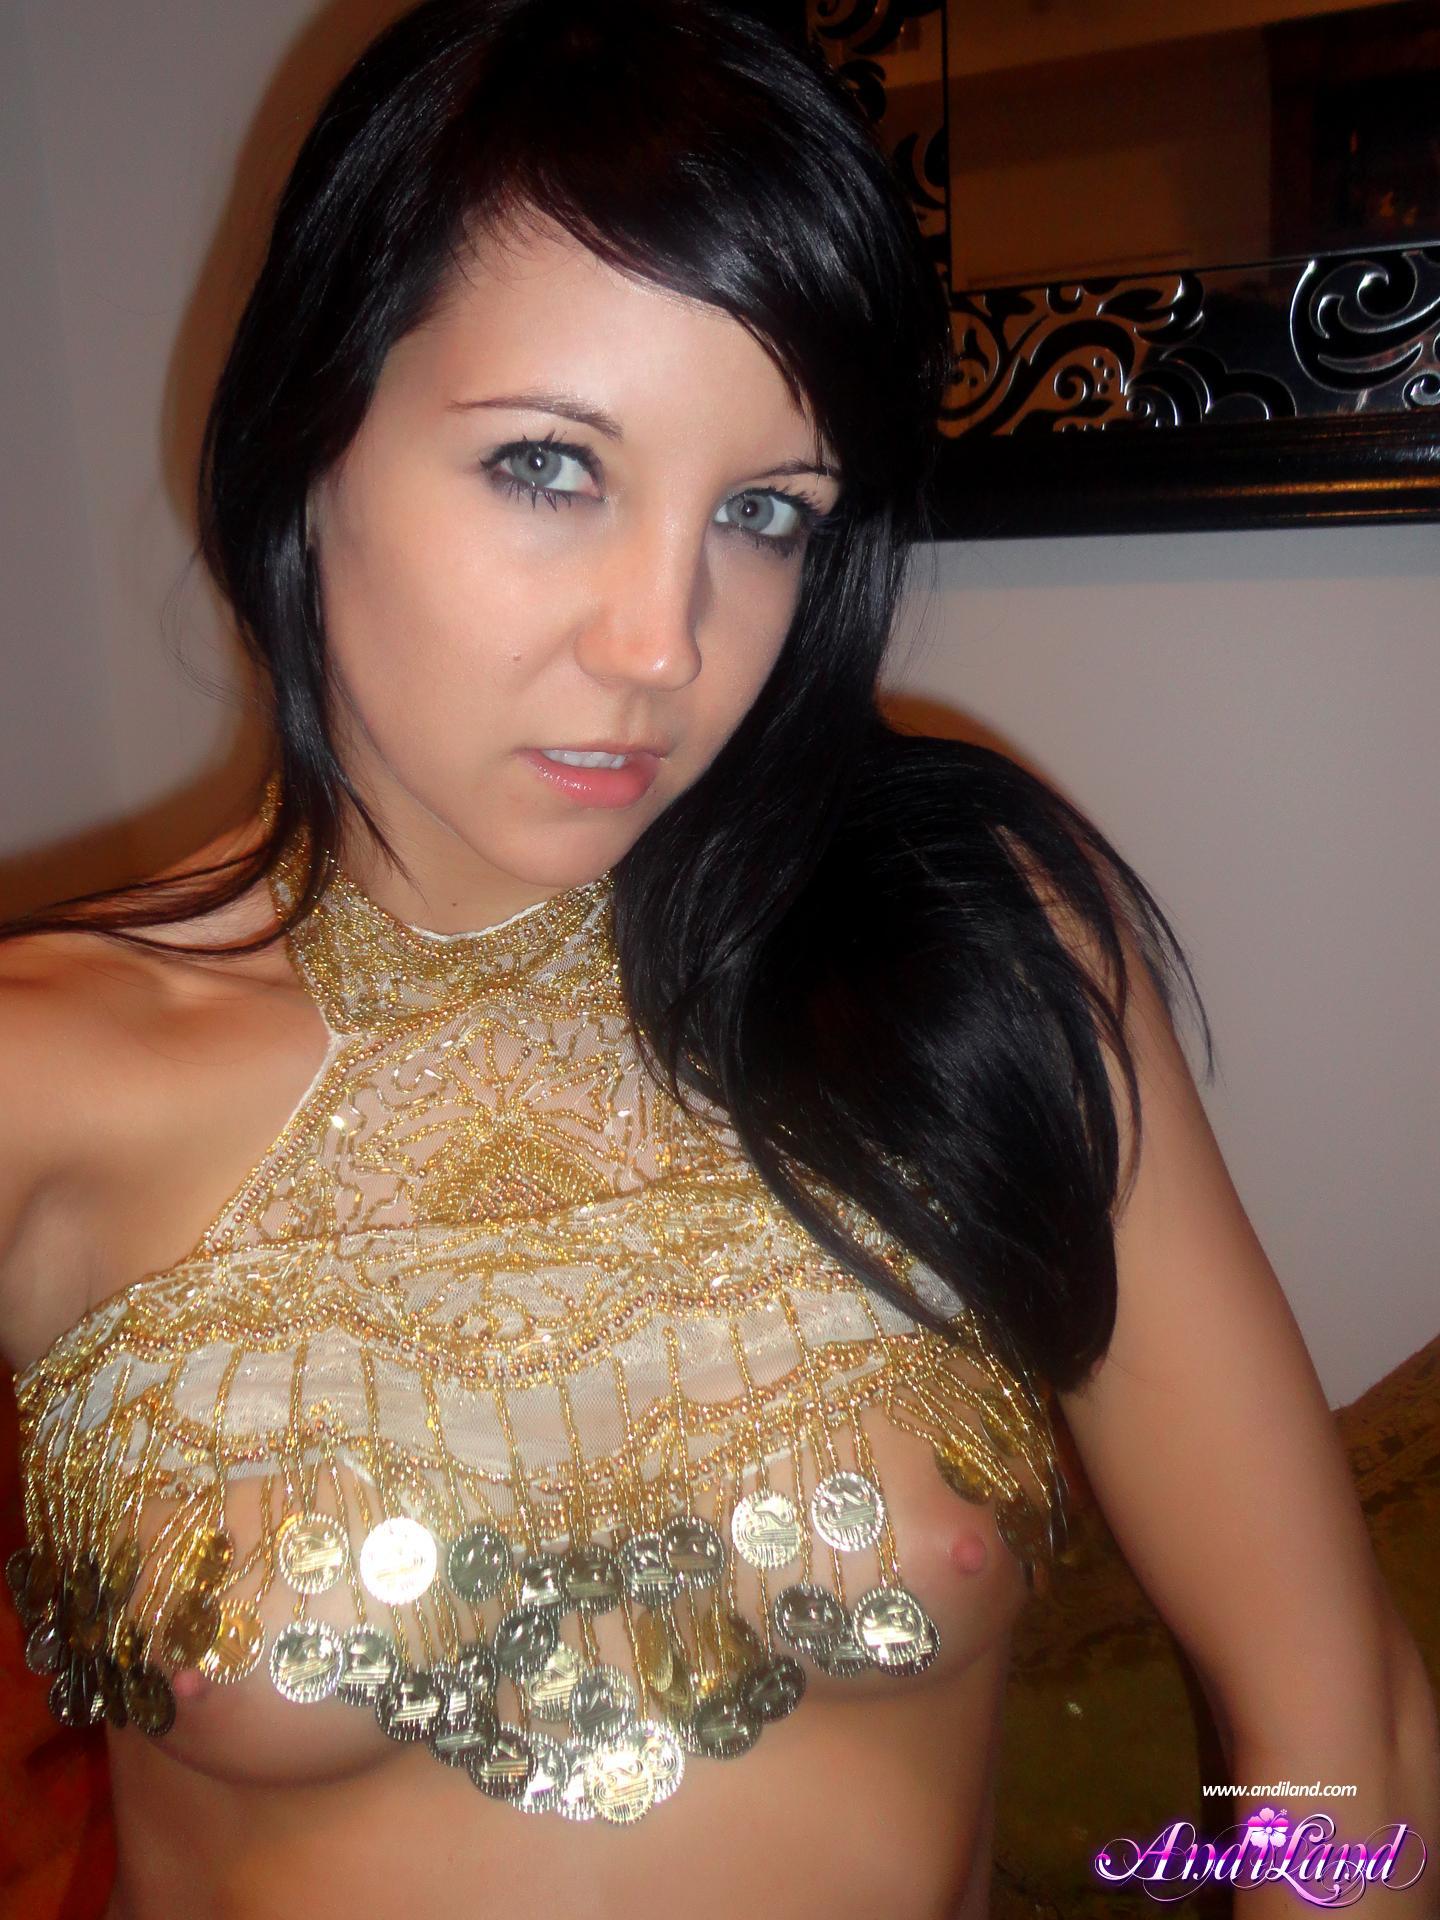 Pictures of Andi ready to have some fun in a hot belly dancer outfit #53141085